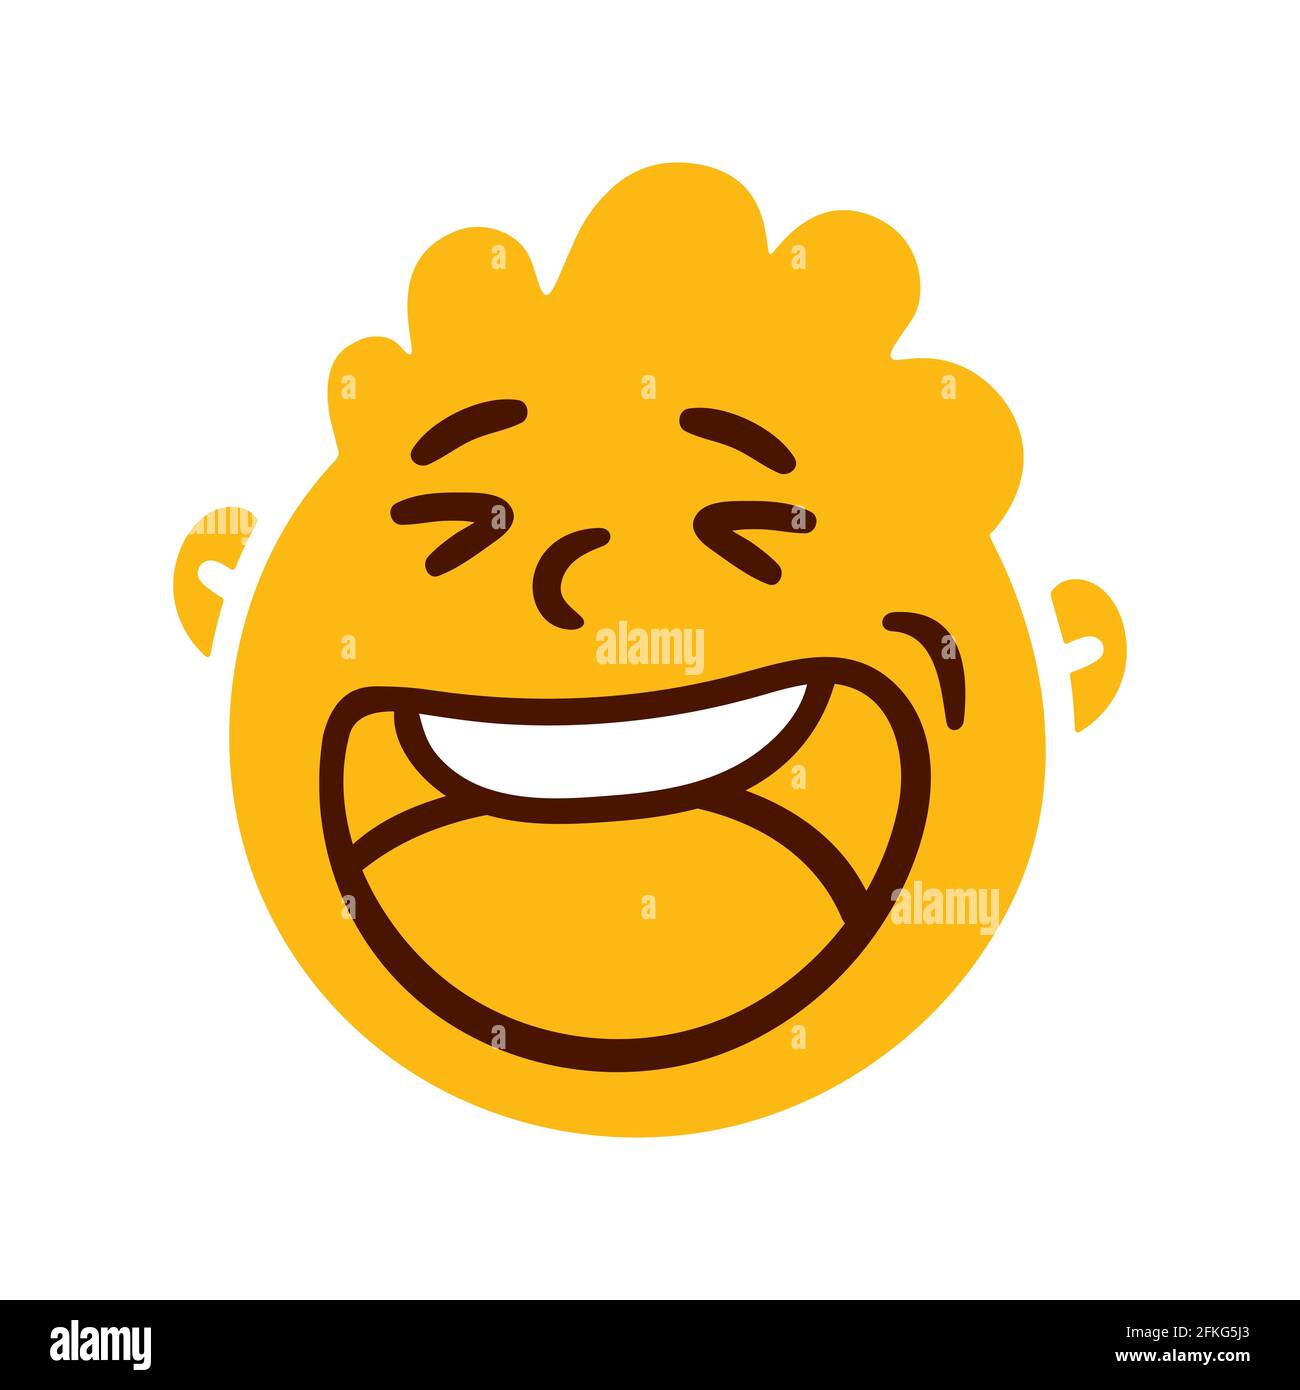 Round abstract face with happy emotion. Happy smiling emoji avatar. Portrait of a jubilant man. Cartoon style. Flat design vector illustration. Stock Vector